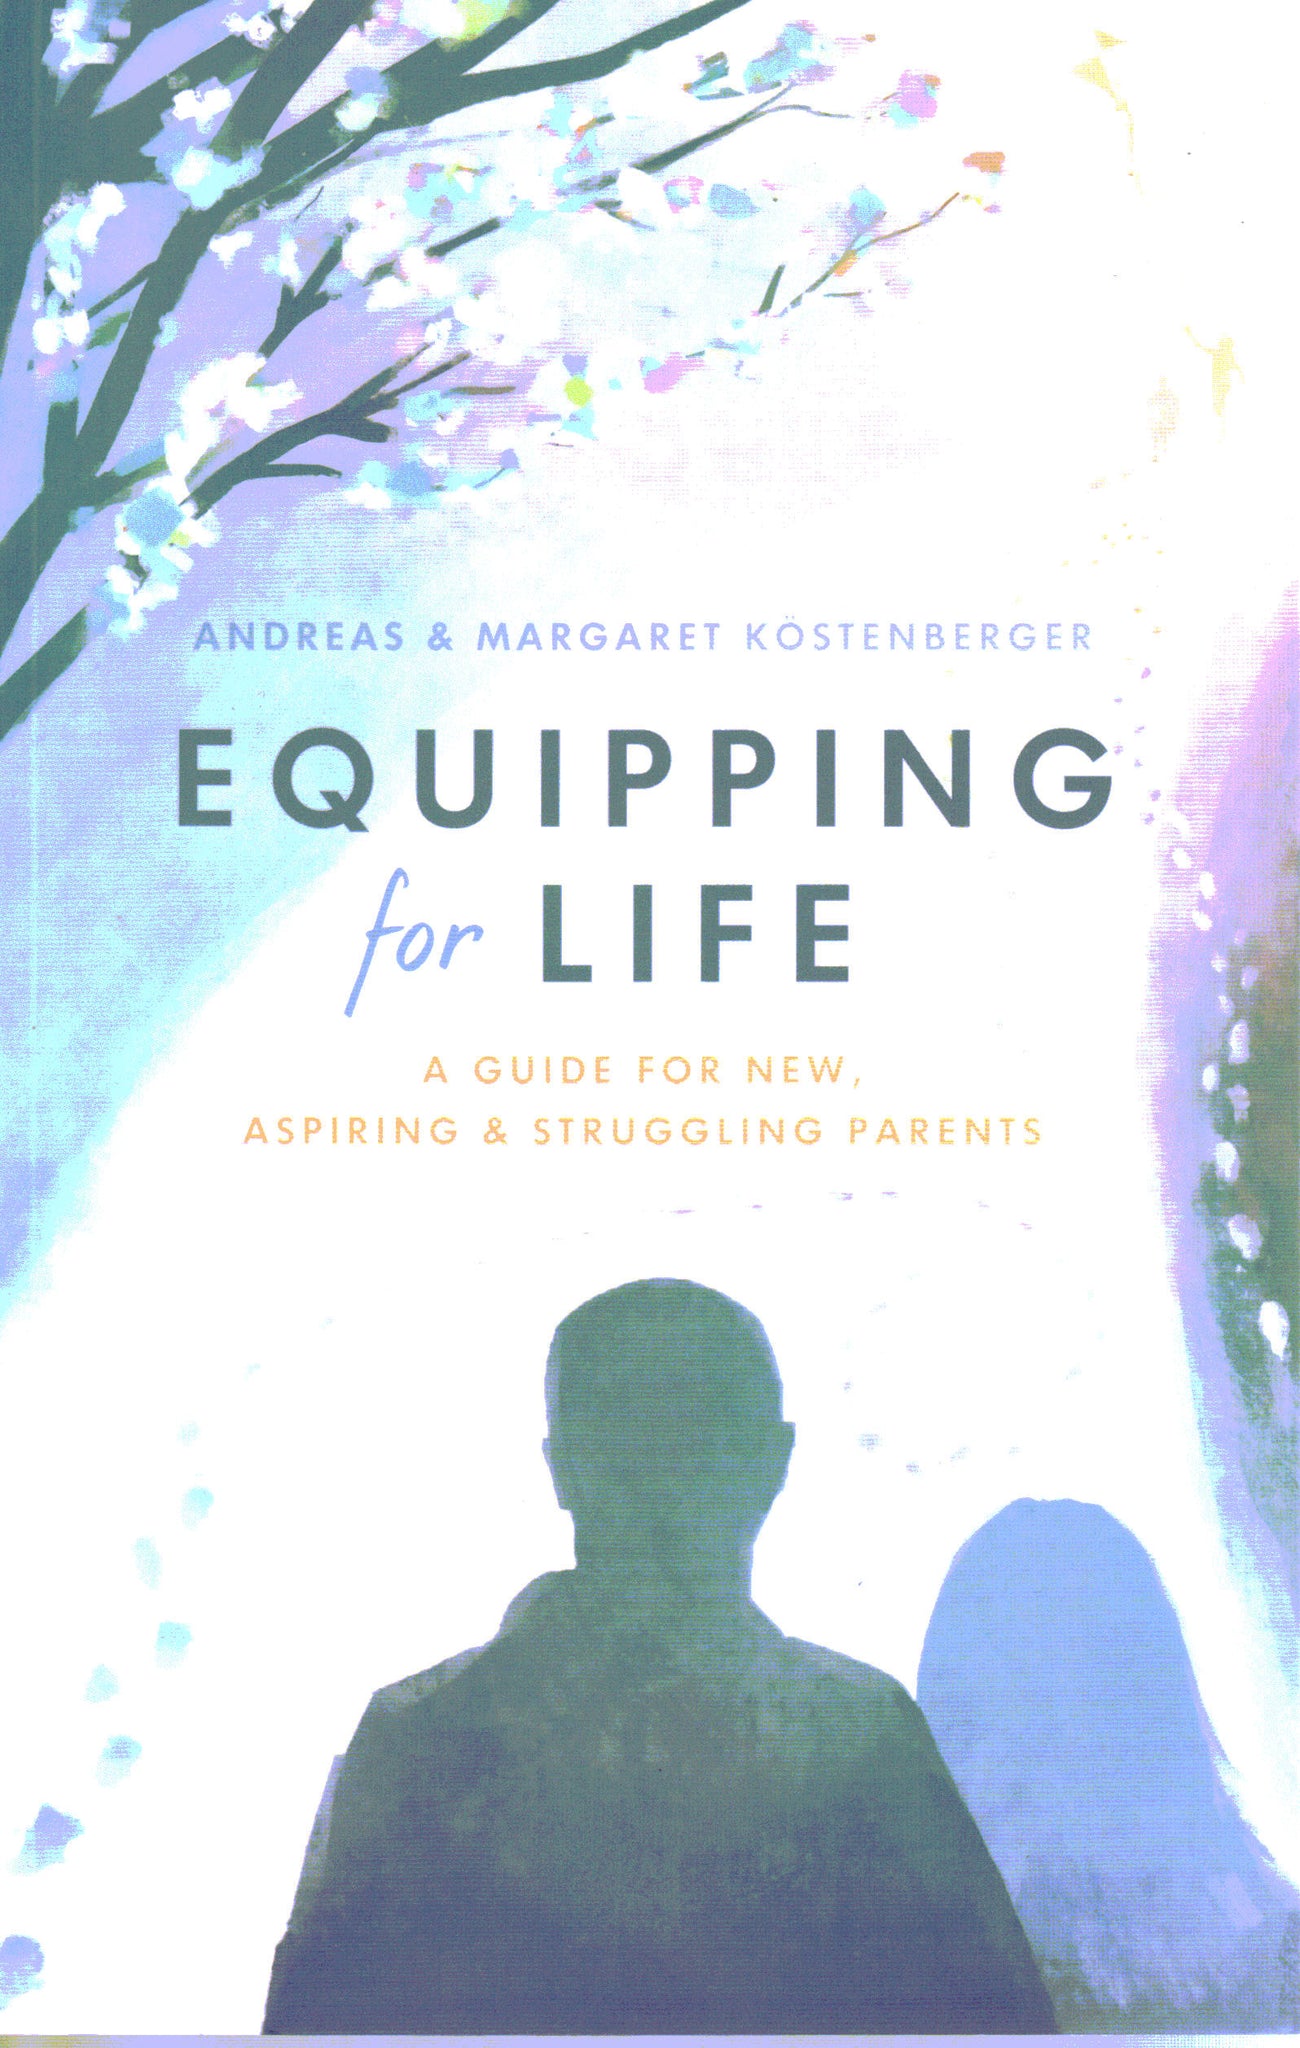 Equipping for Life: A Guide for New, Aspiring and Struggling Parents